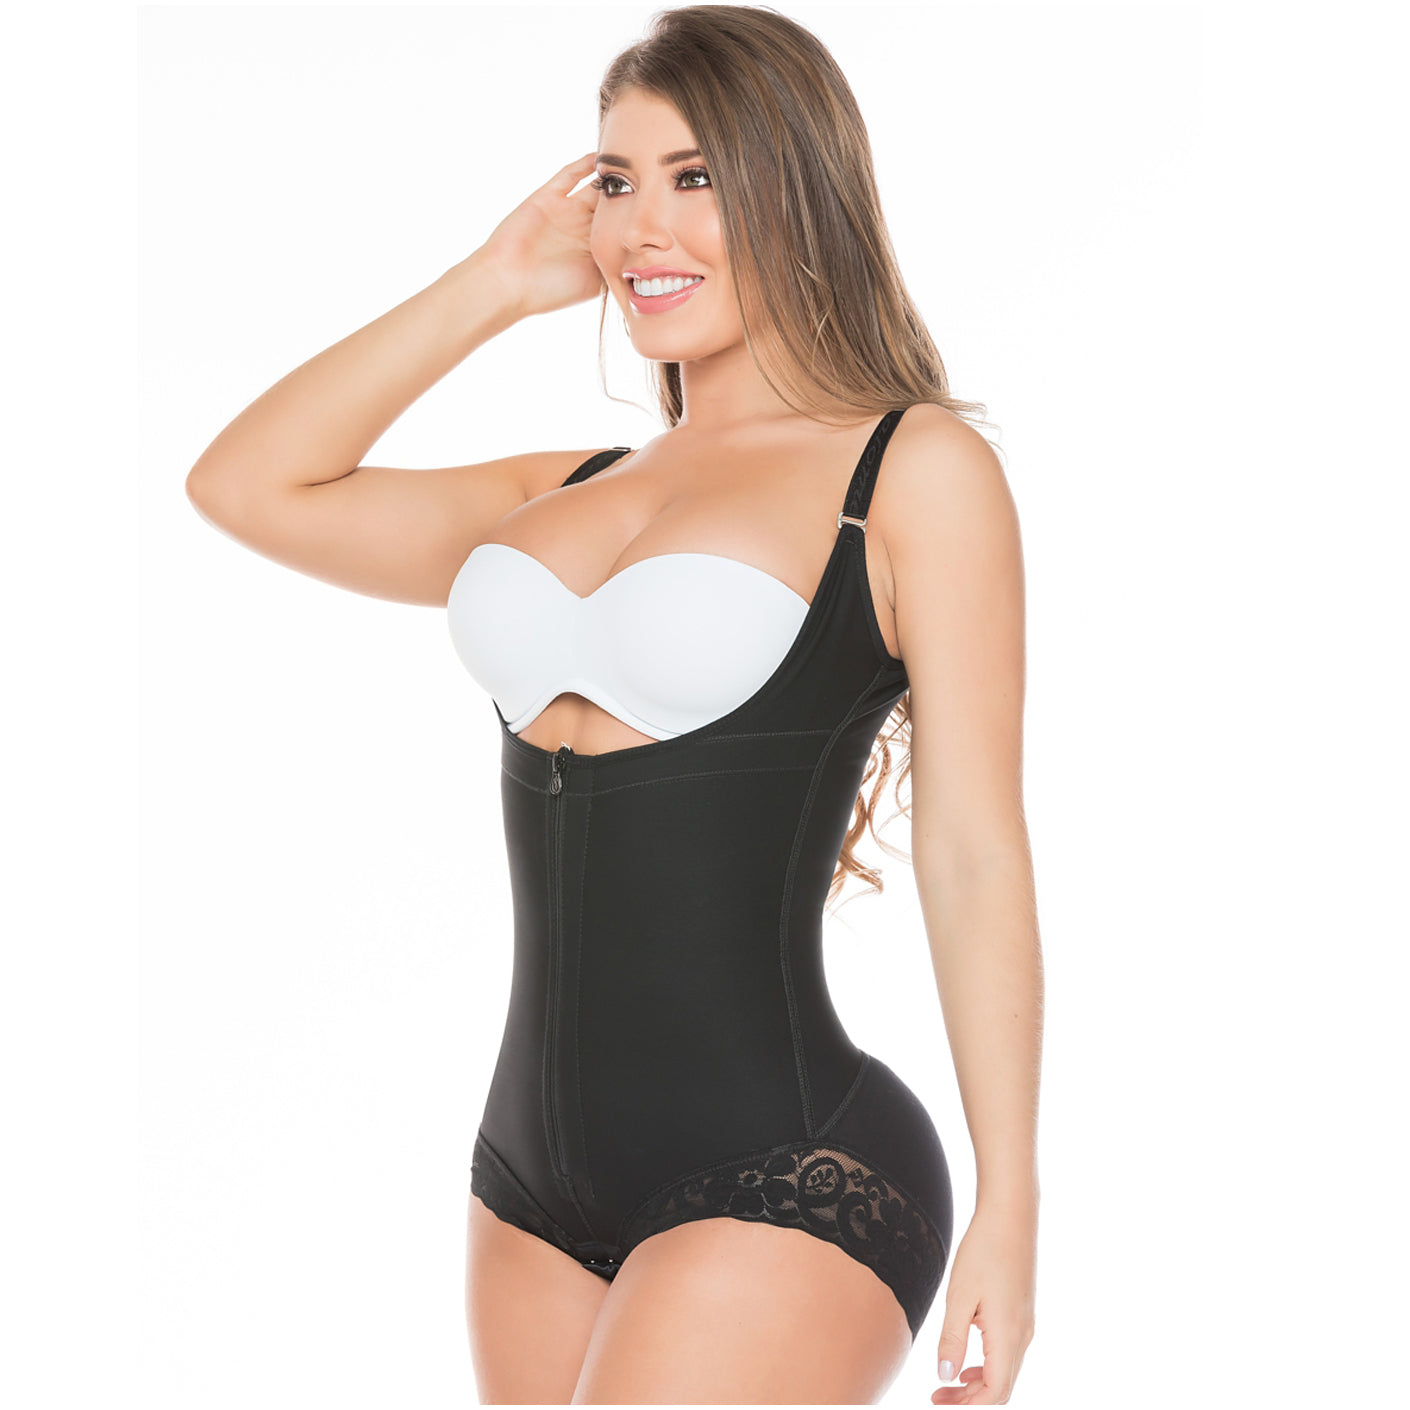 Fajas Salome 0315-1, Waist Cincher Trainer for Women, Colombian Body  Shaper for Daily Use